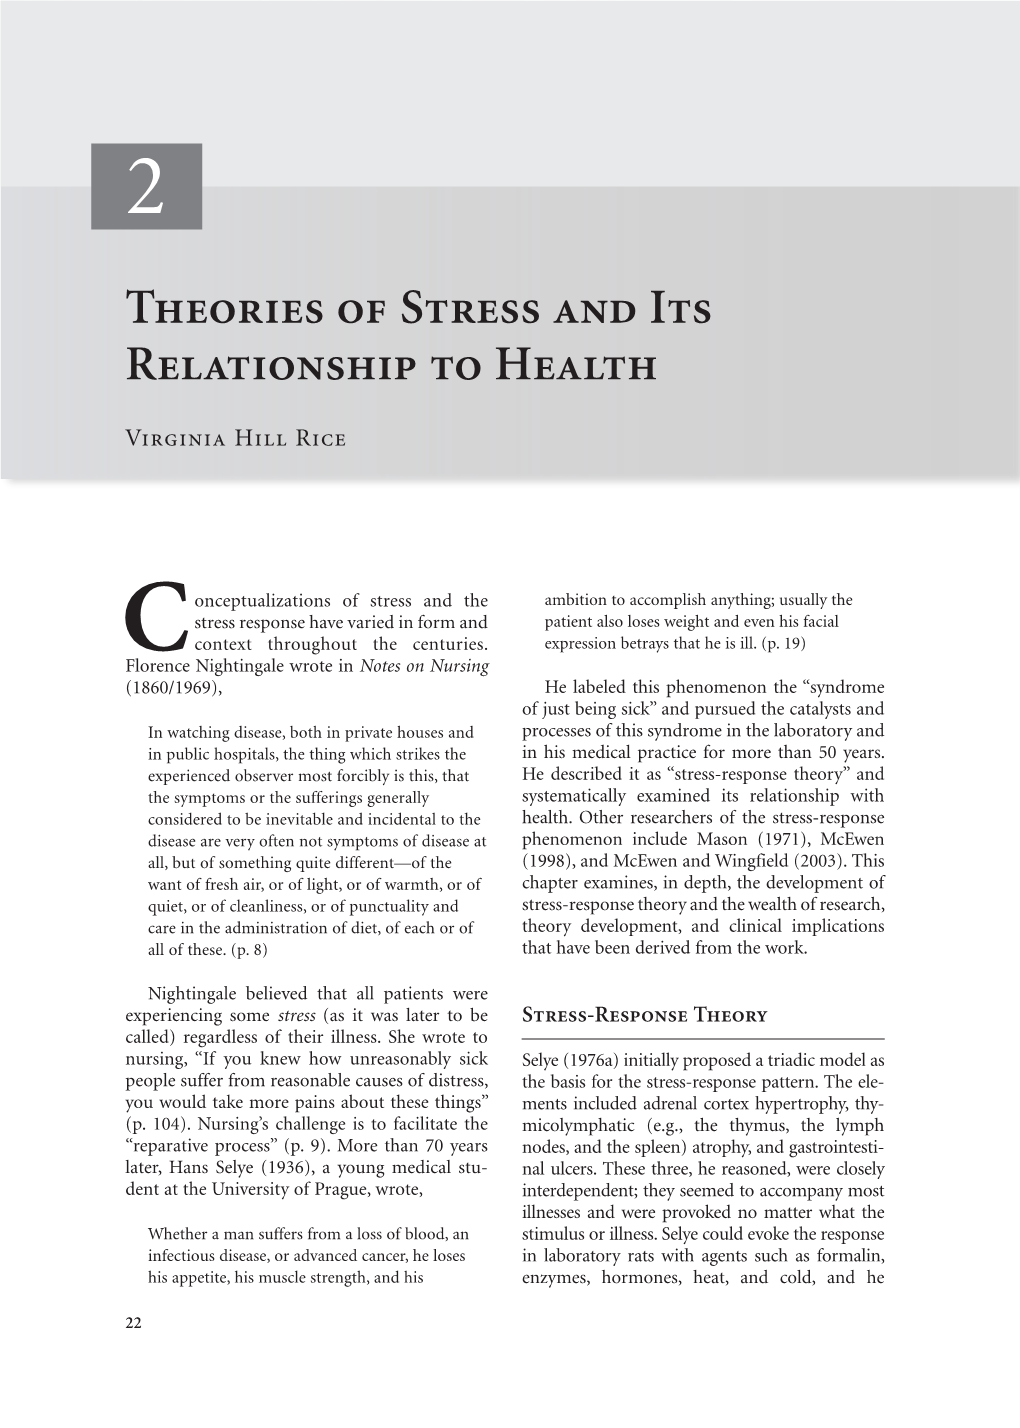 Chapter 2: Theories of Stress and Its Relationship to Health